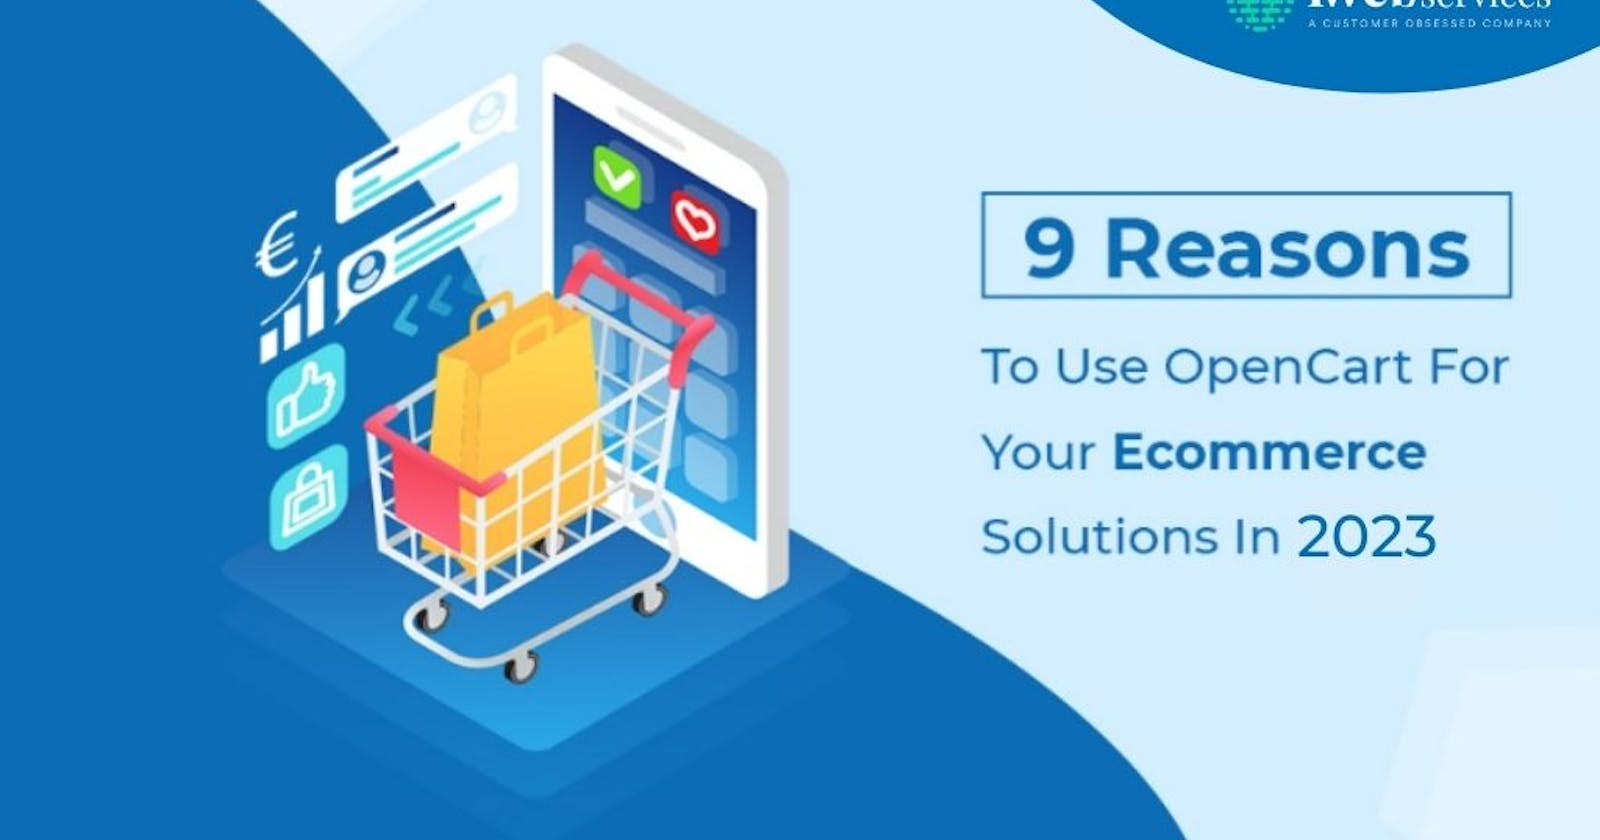 9 Reasons To Use OpenCart For Your E-commerce  Solutions In 2023